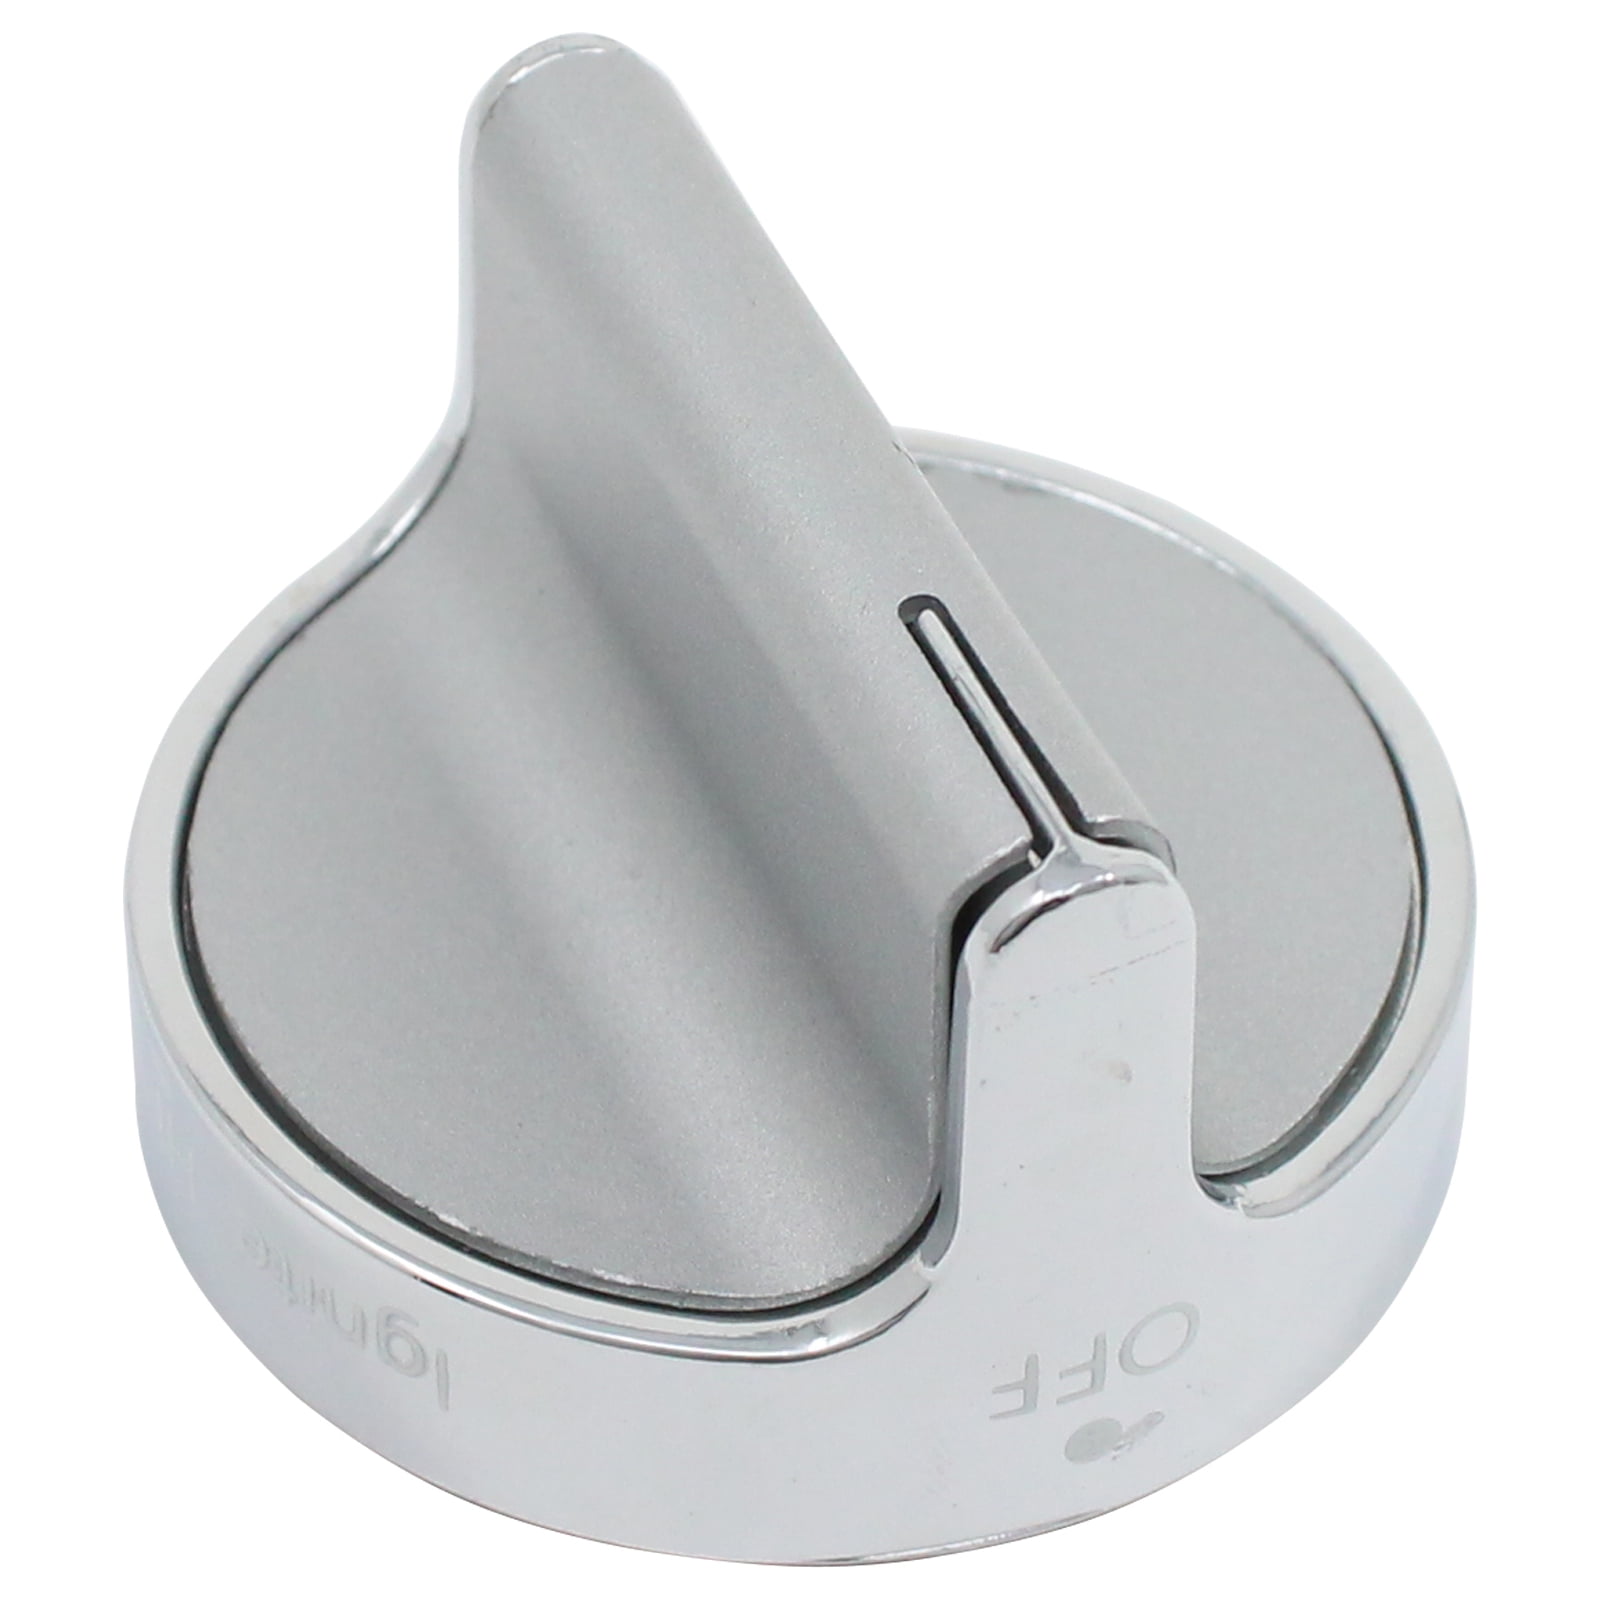 AP6023301 W10594481 Stainless Steel Cooker Stove Control knob PS11756643 Compatible with Whirlpool Gas Ranges Replaces WPW10594481 Upgraded Version 5 Pack EAP10594481 3281332 